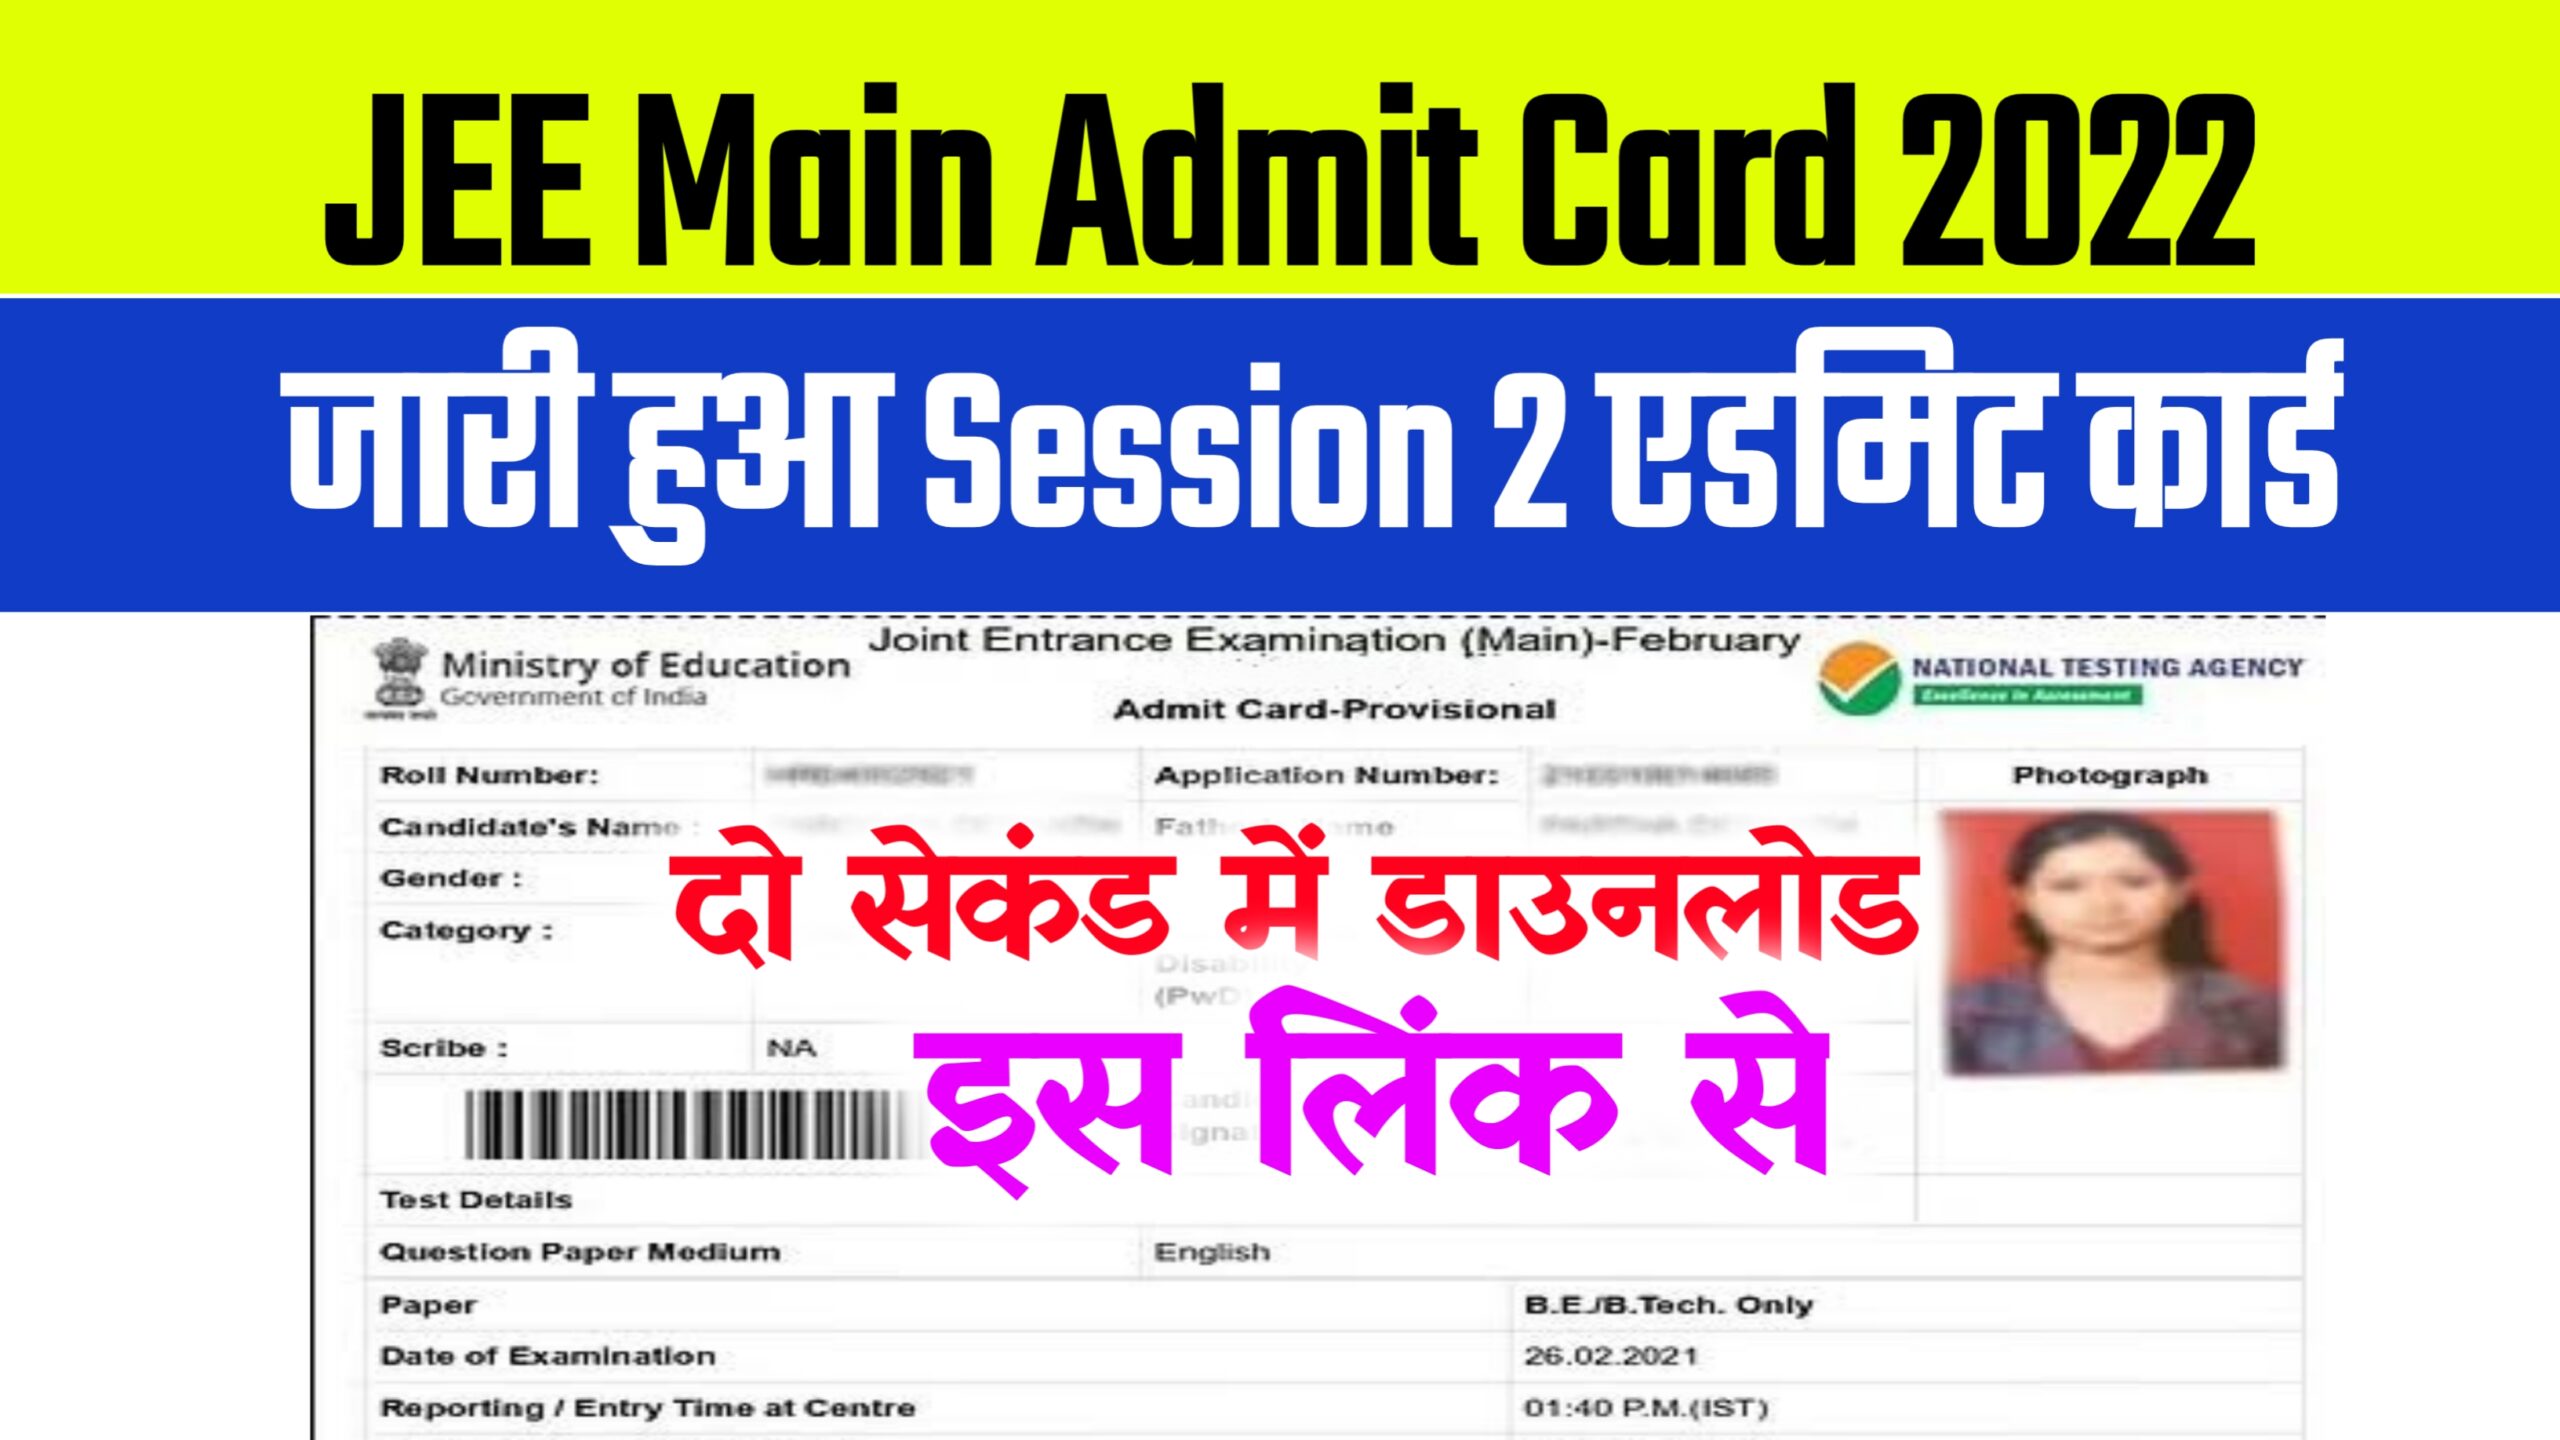 JEE Main Session 2 Admit Card 2022 Download Link ~ @jeemain.nta.nic.in